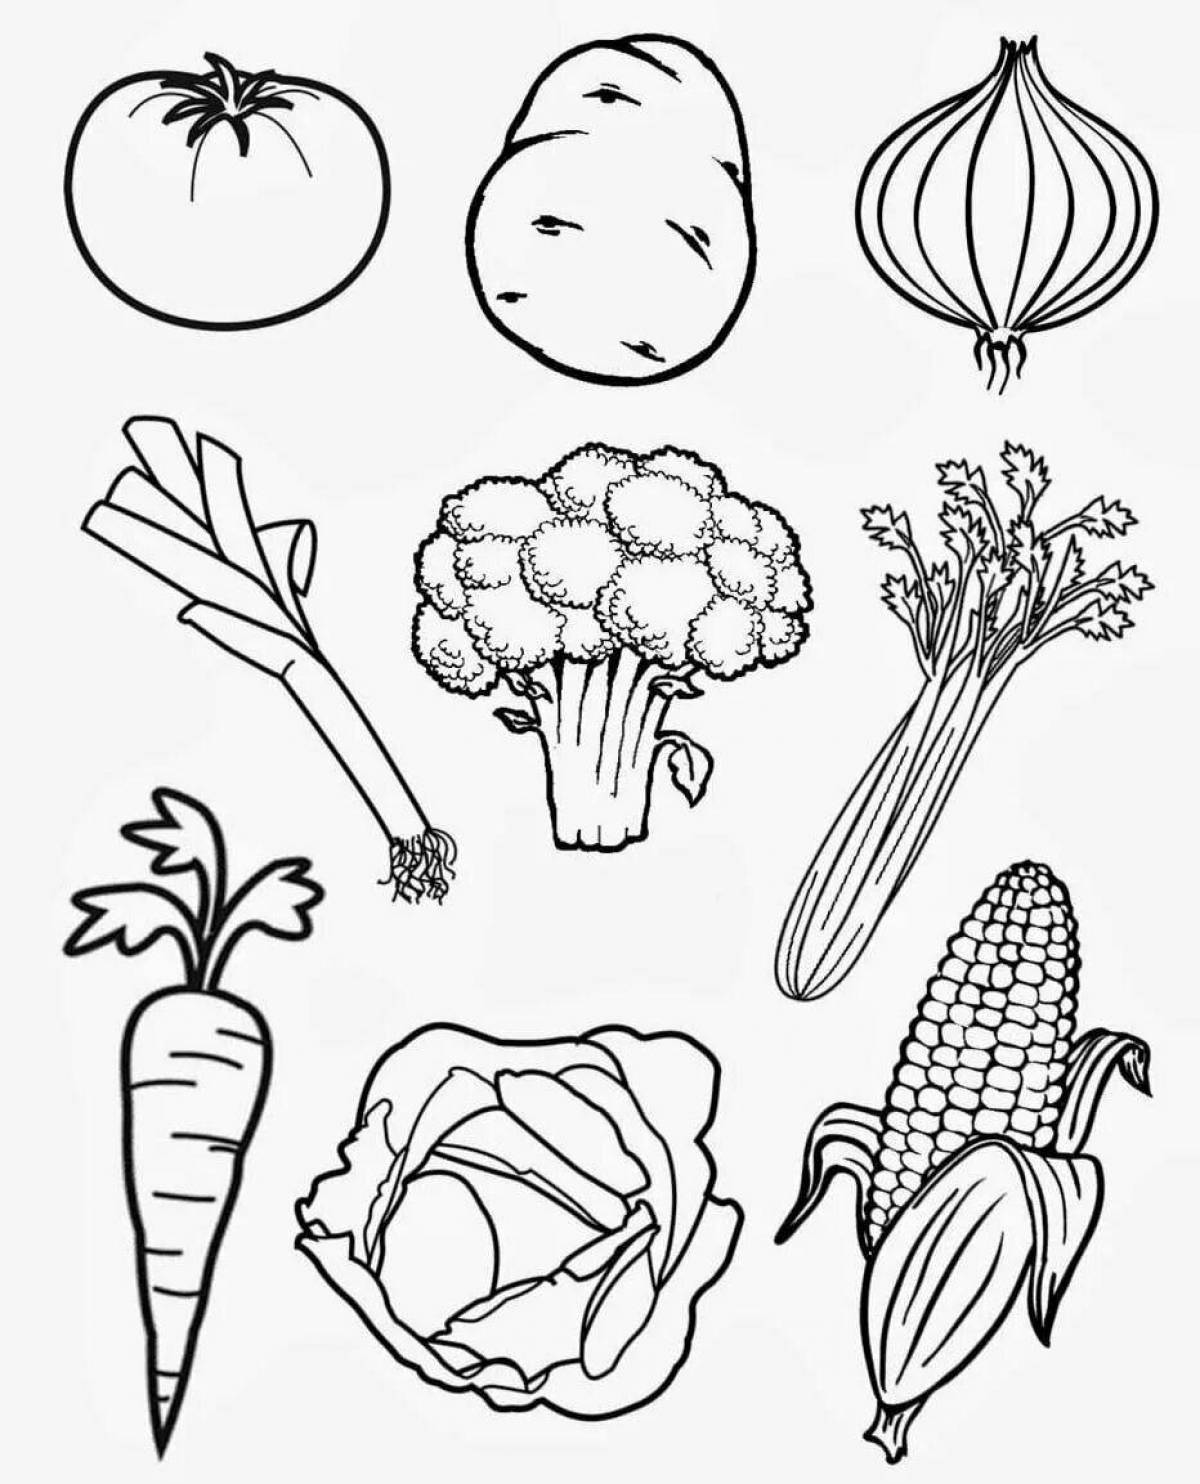 A fun vegetable coloring book for 4-5 year olds